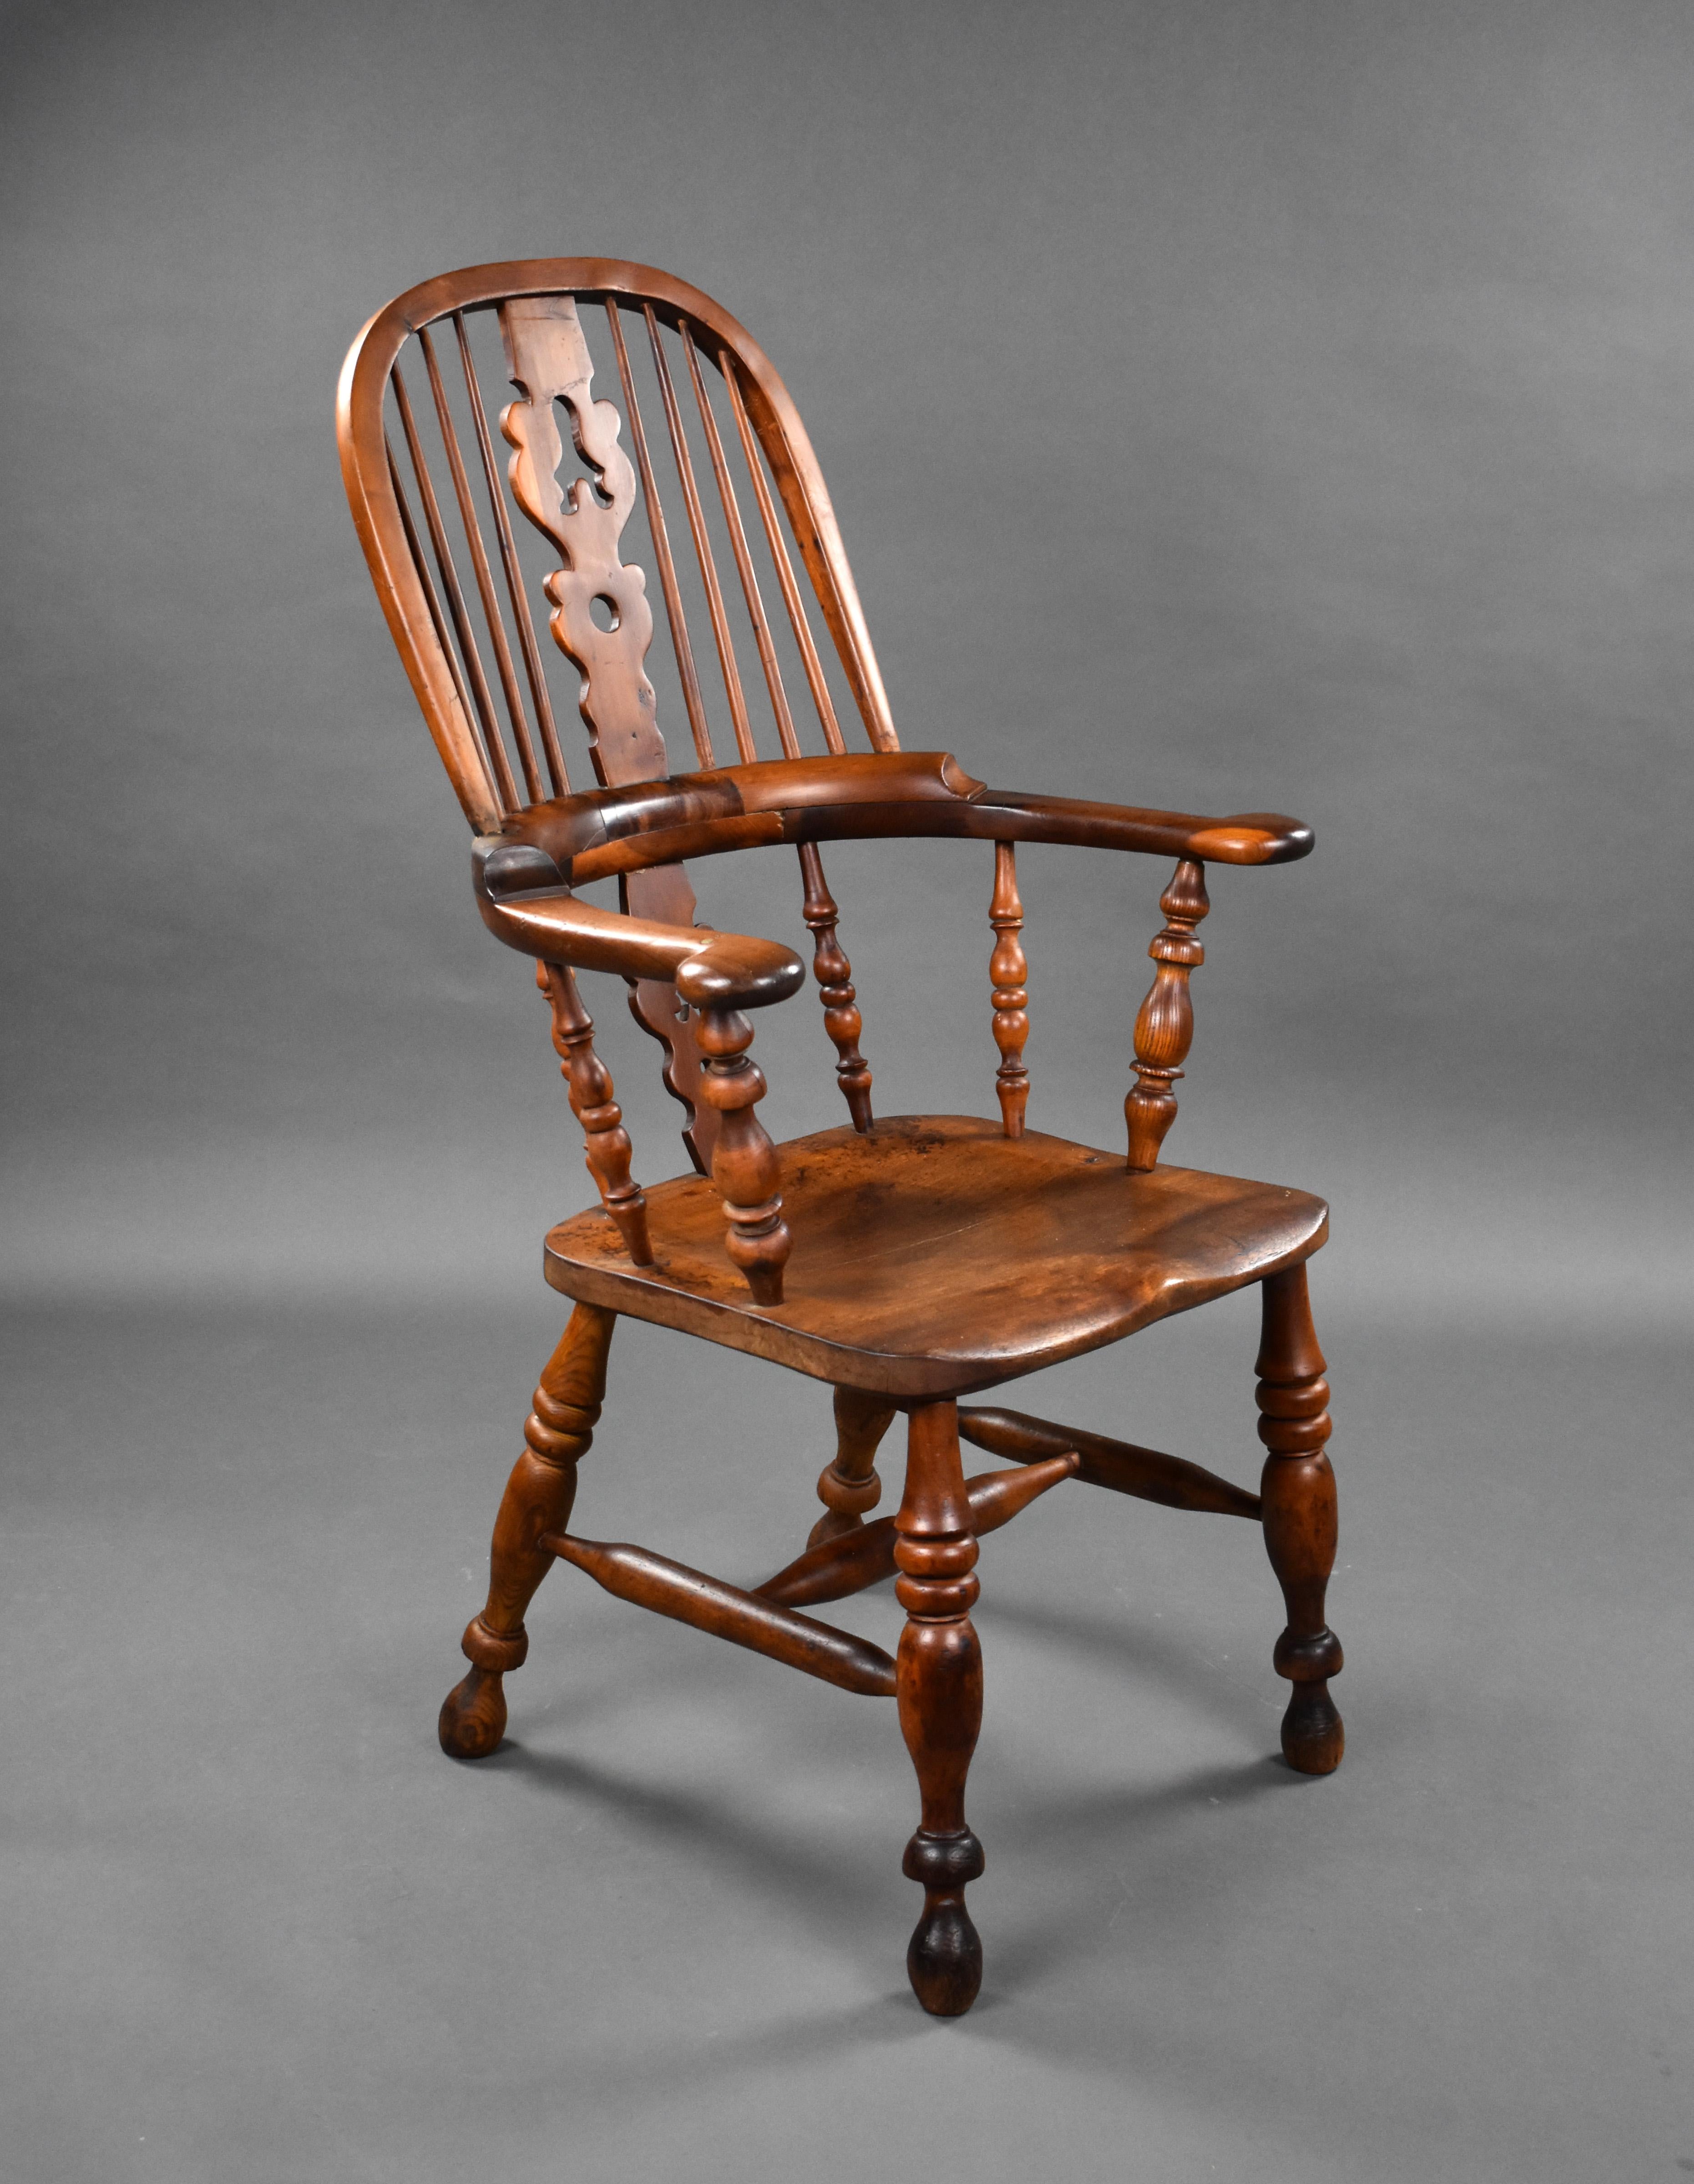 A good quality 19th century yew wood broad arm Windsor chair, having a high back and an elm seat, the chair remains in good condition, showing minor signs of wear commensurate with age and use. 

Measures: Width: 65cm depth: 53cm height: 108.5cm.